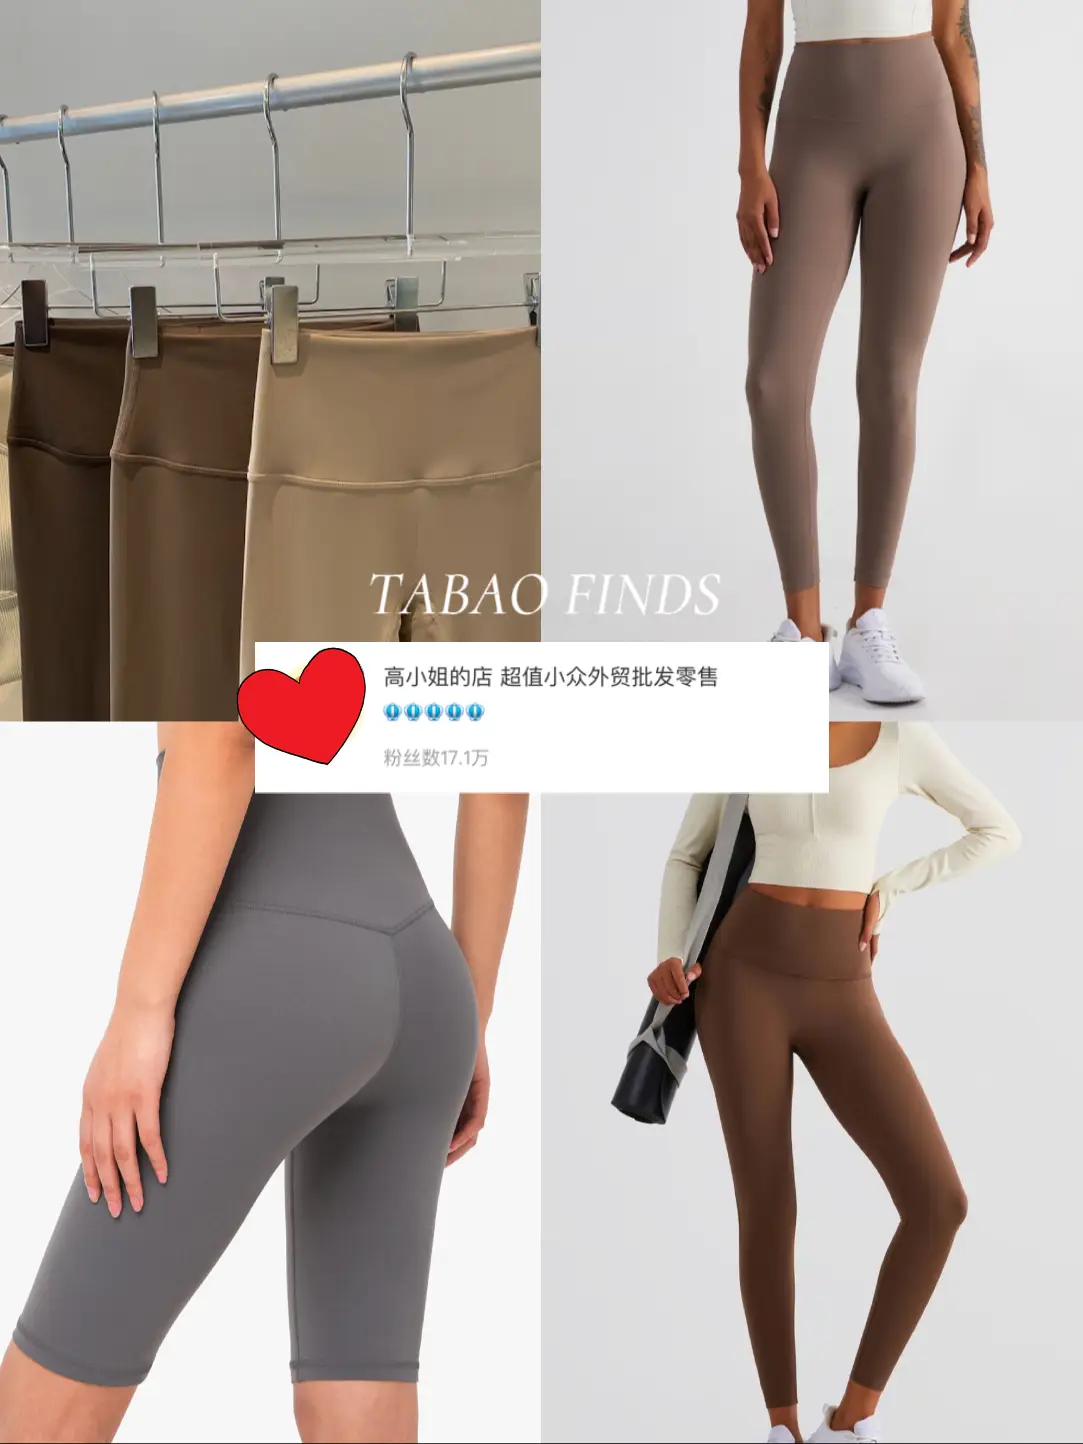 LULULEMON DUPE, 4 PCS @ $63 TAOBAO FINDS 🧡, Gallery posted by cora🤍